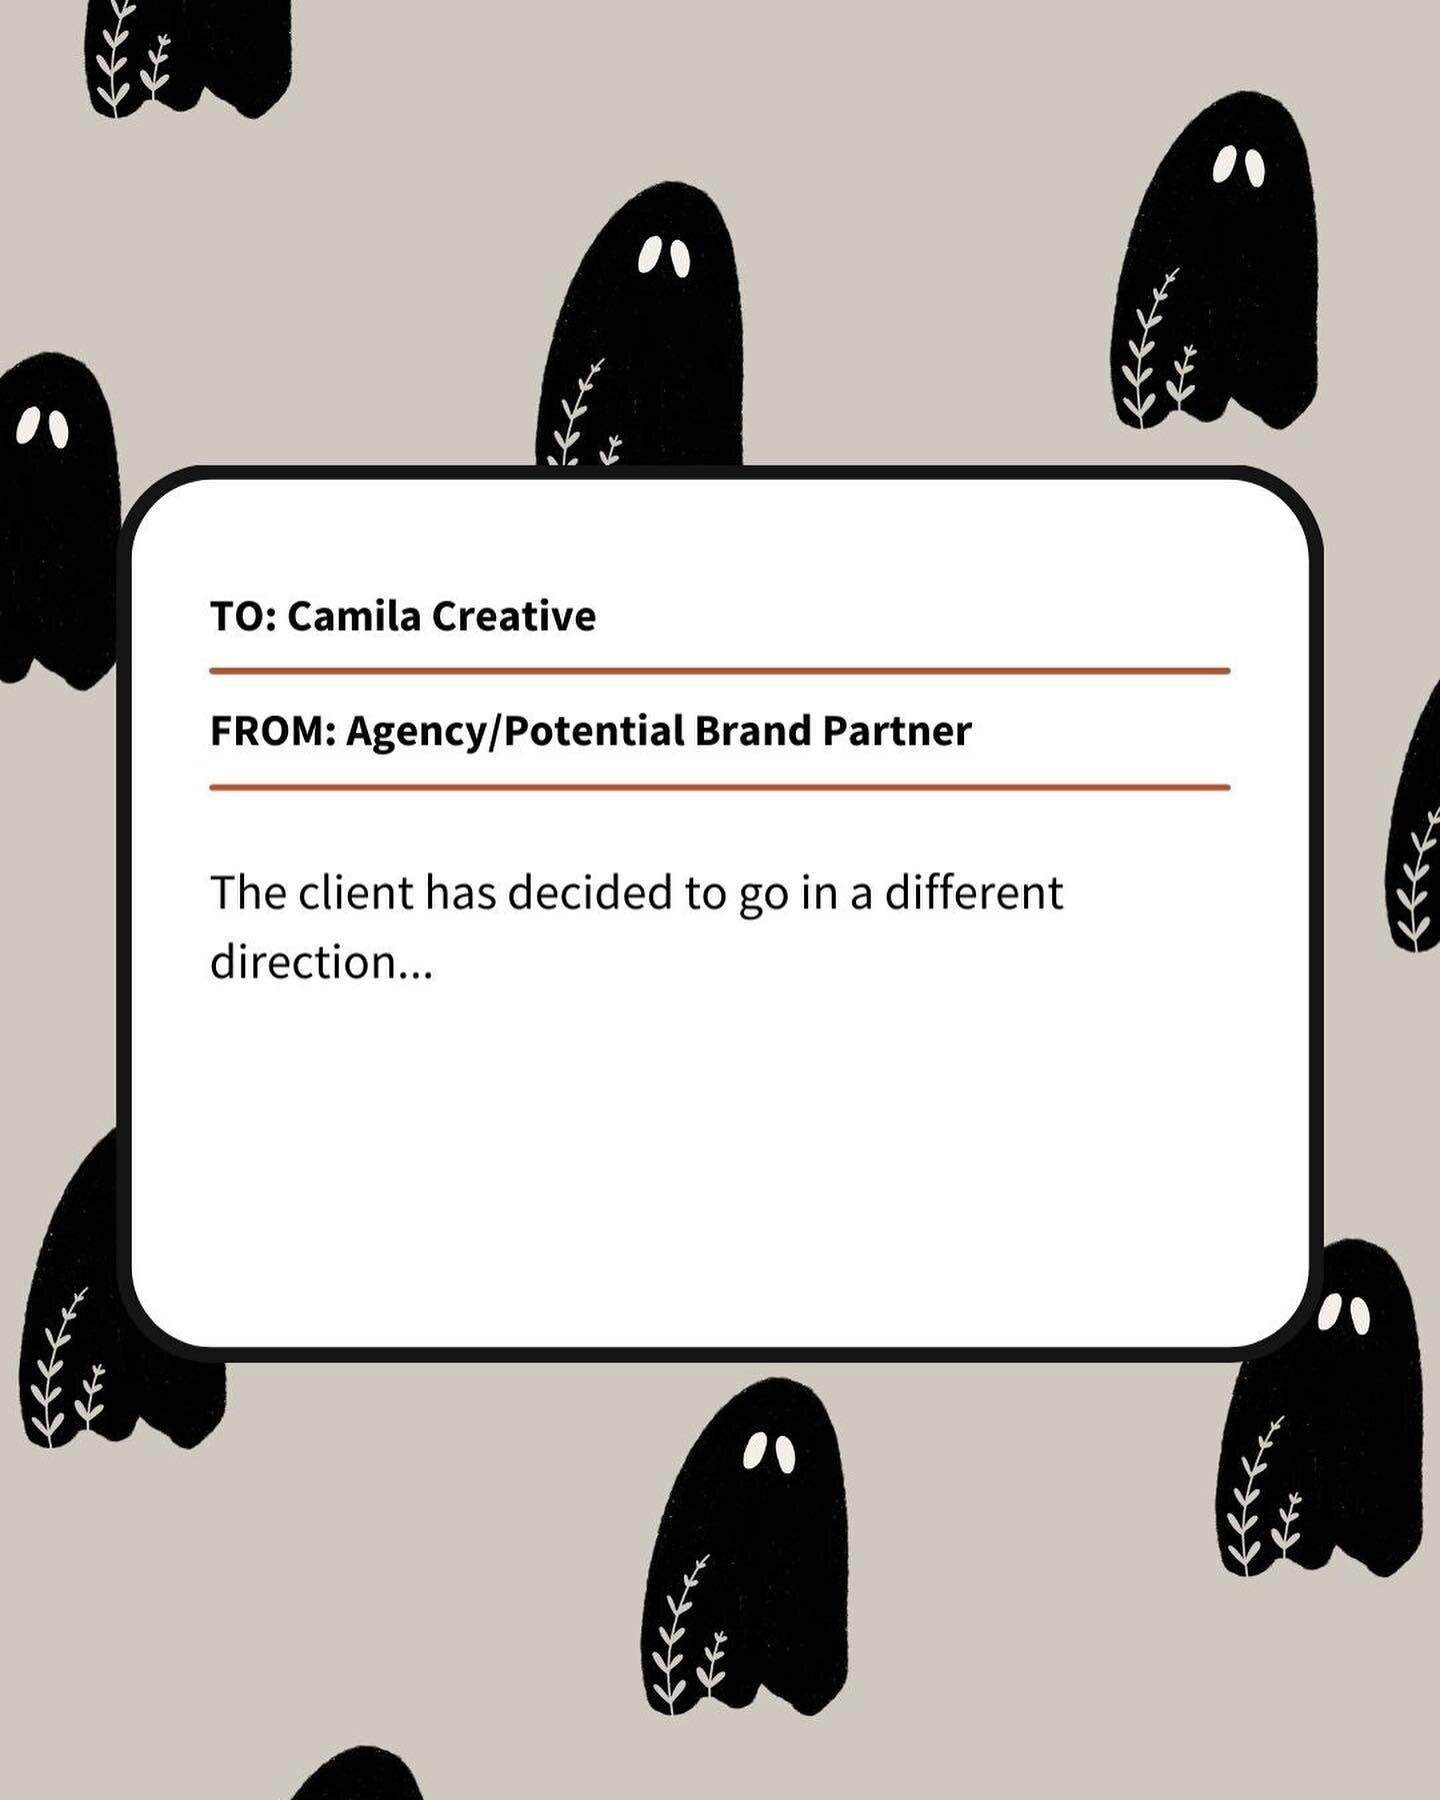 Honoring spooky season with some messages/emails that still haunt your favorite talent management team&hellip; 👻👻👻 Happy Halloween! 🎃🎃🎃